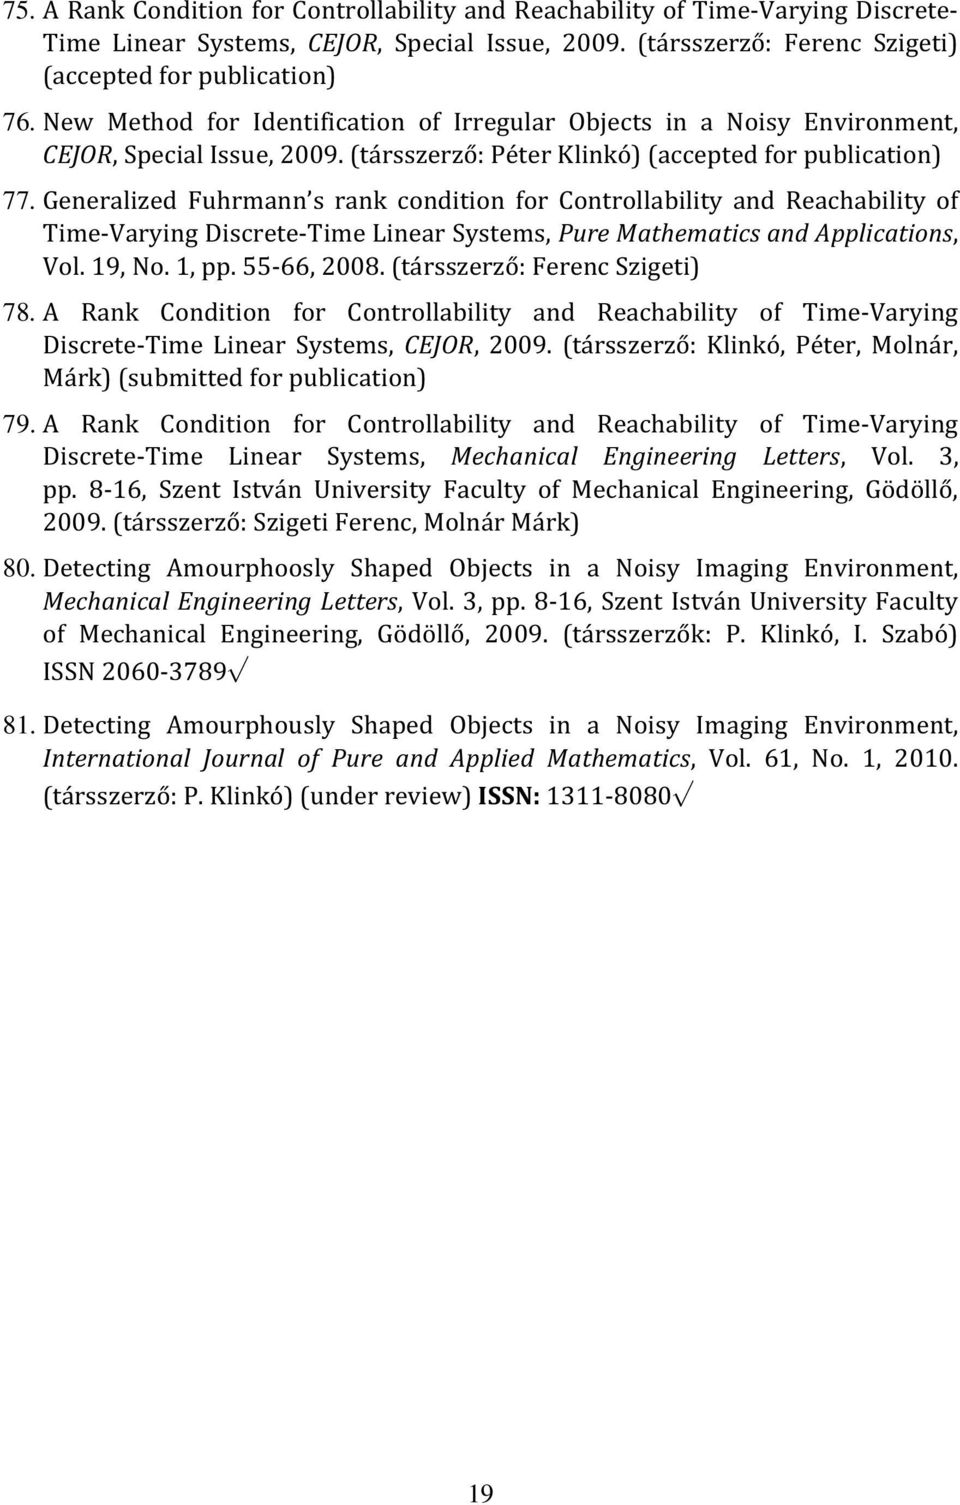 Generalized Fuhrmann s rank condition for Controllability and Reachability of Time-Varying Discrete-Time Linear Systems, Pure Mathematics and Applications, Vol. 19, No. 1, pp. 55-66, 2008.